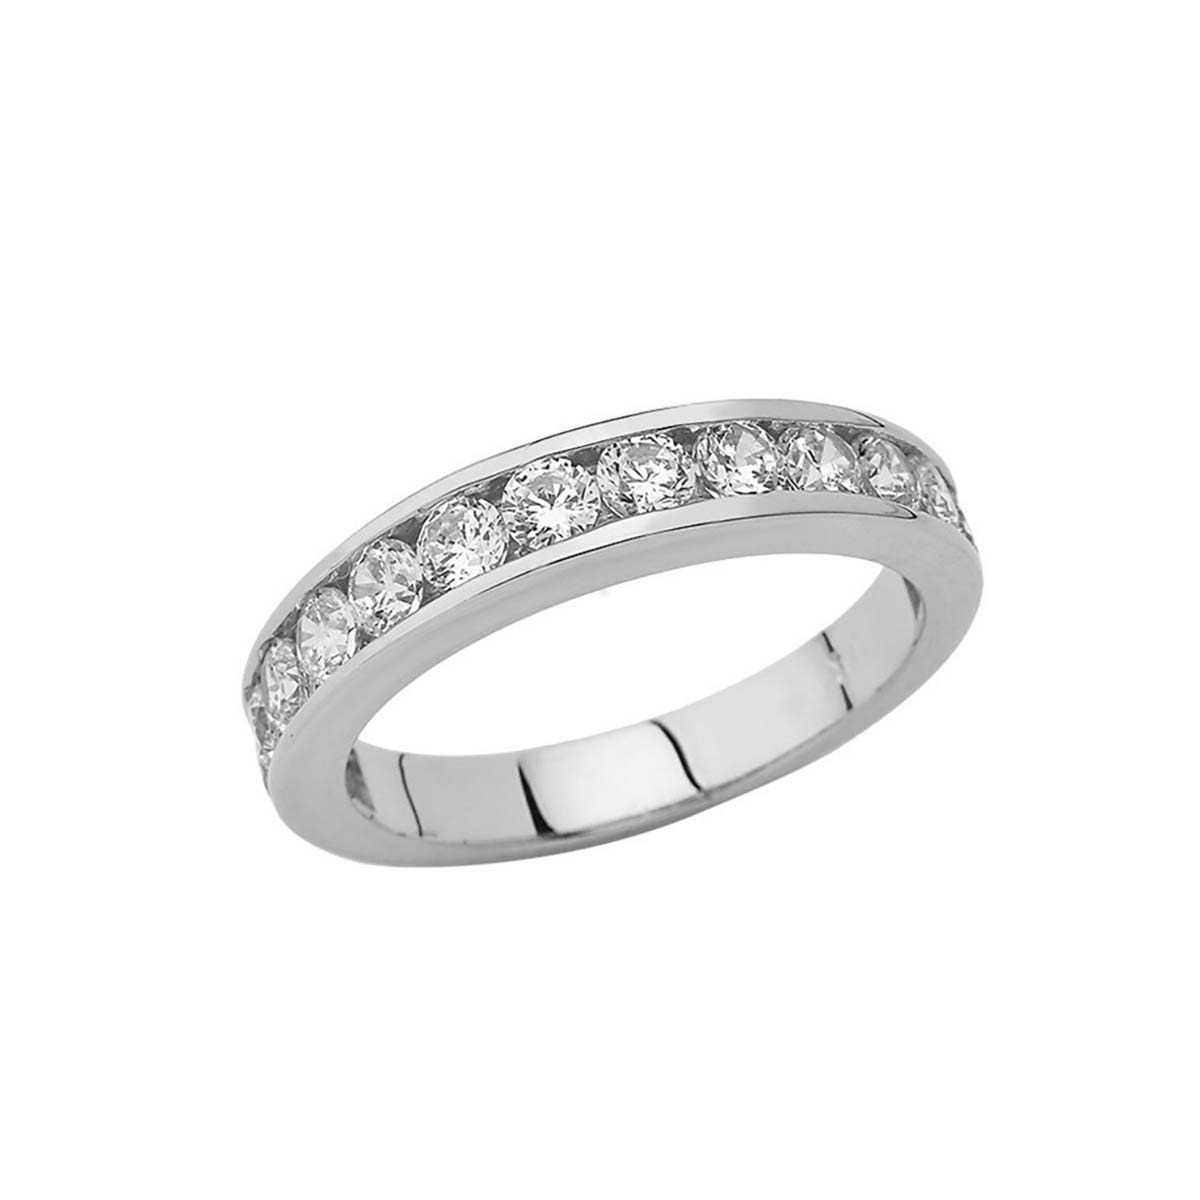 Man Silver Wedding Ring by Gold Boutique GOOFASH